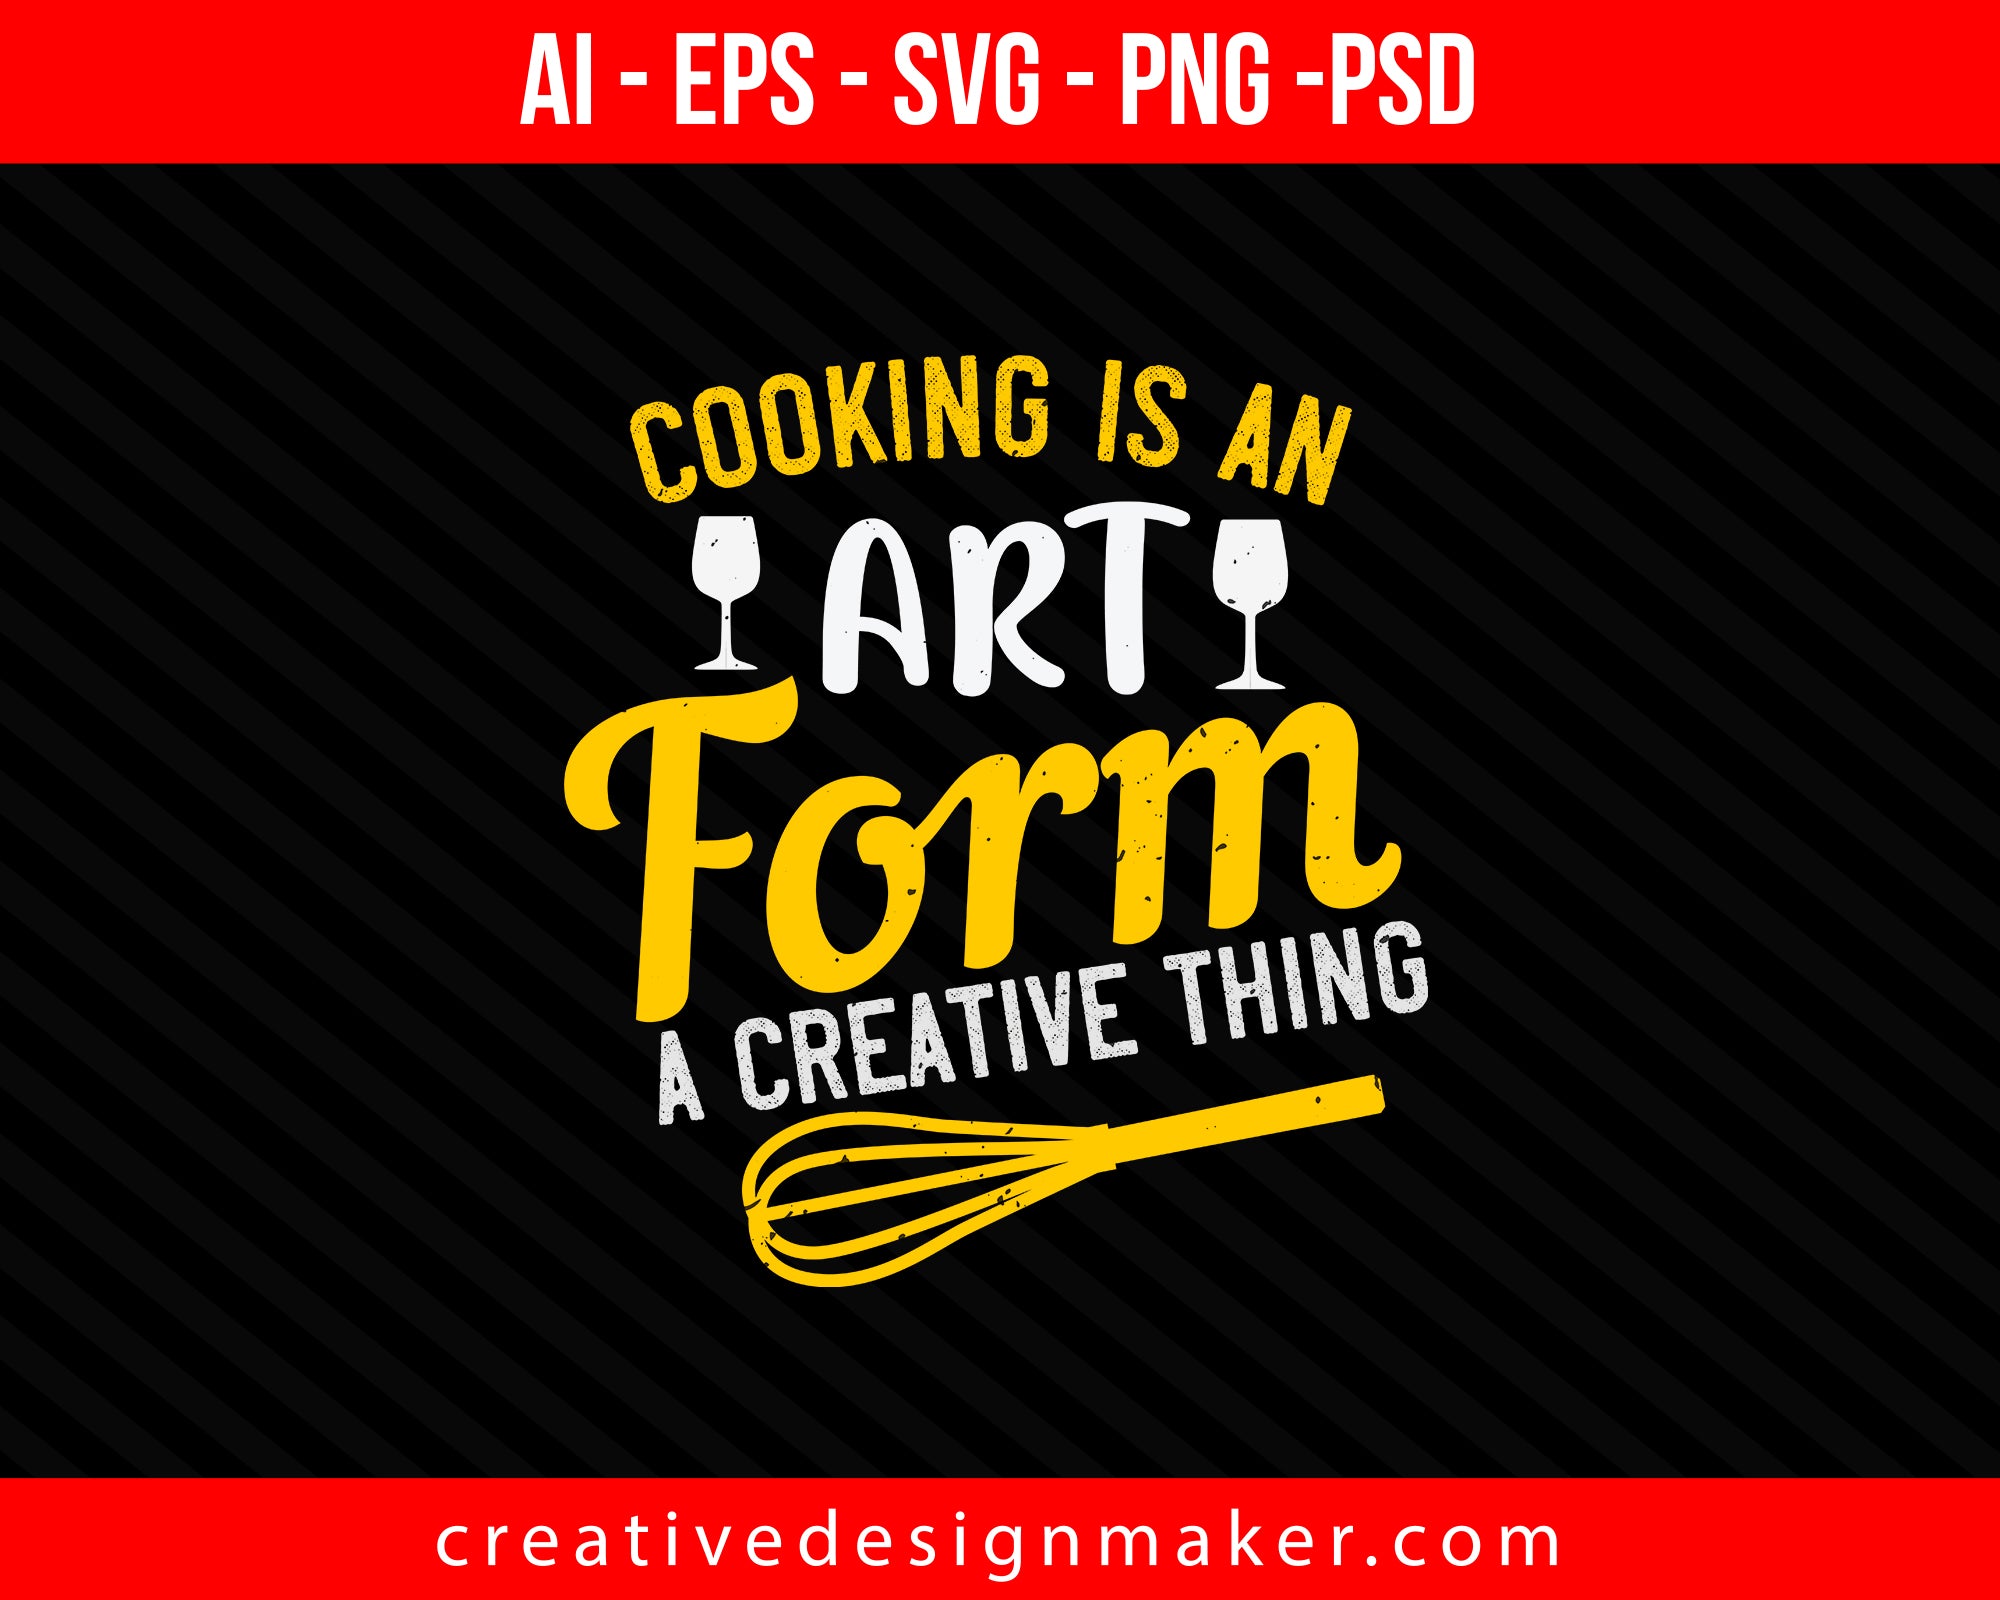 Cooking is an art form, a creative thing Print Ready Editable T-Shirt SVG Design!